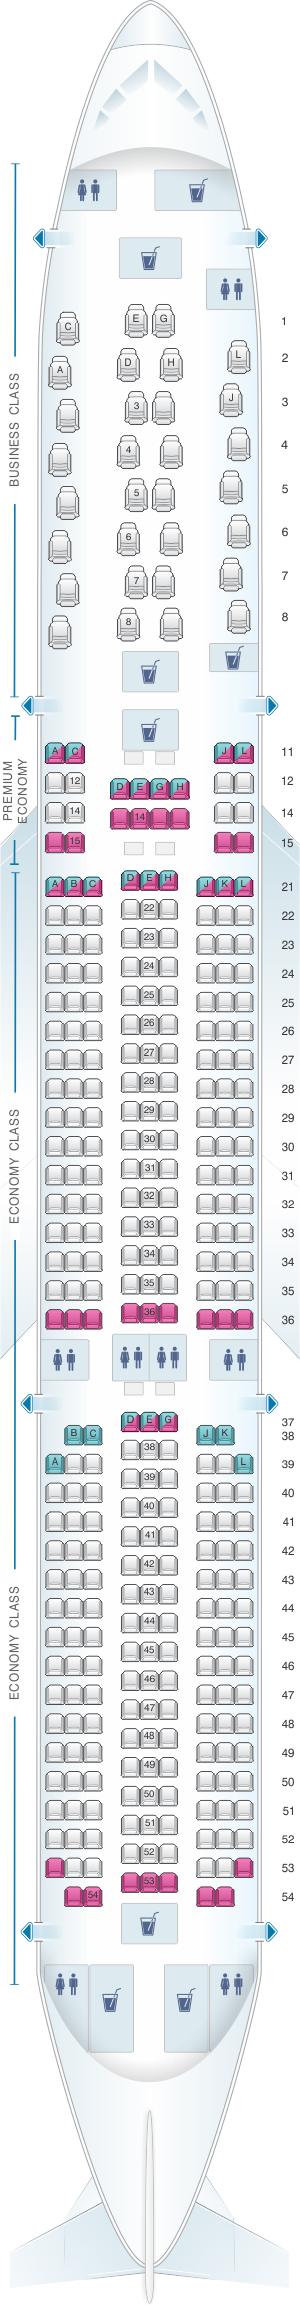 Lufthansa Airbus A350 900 Seating Chart Elcho Table